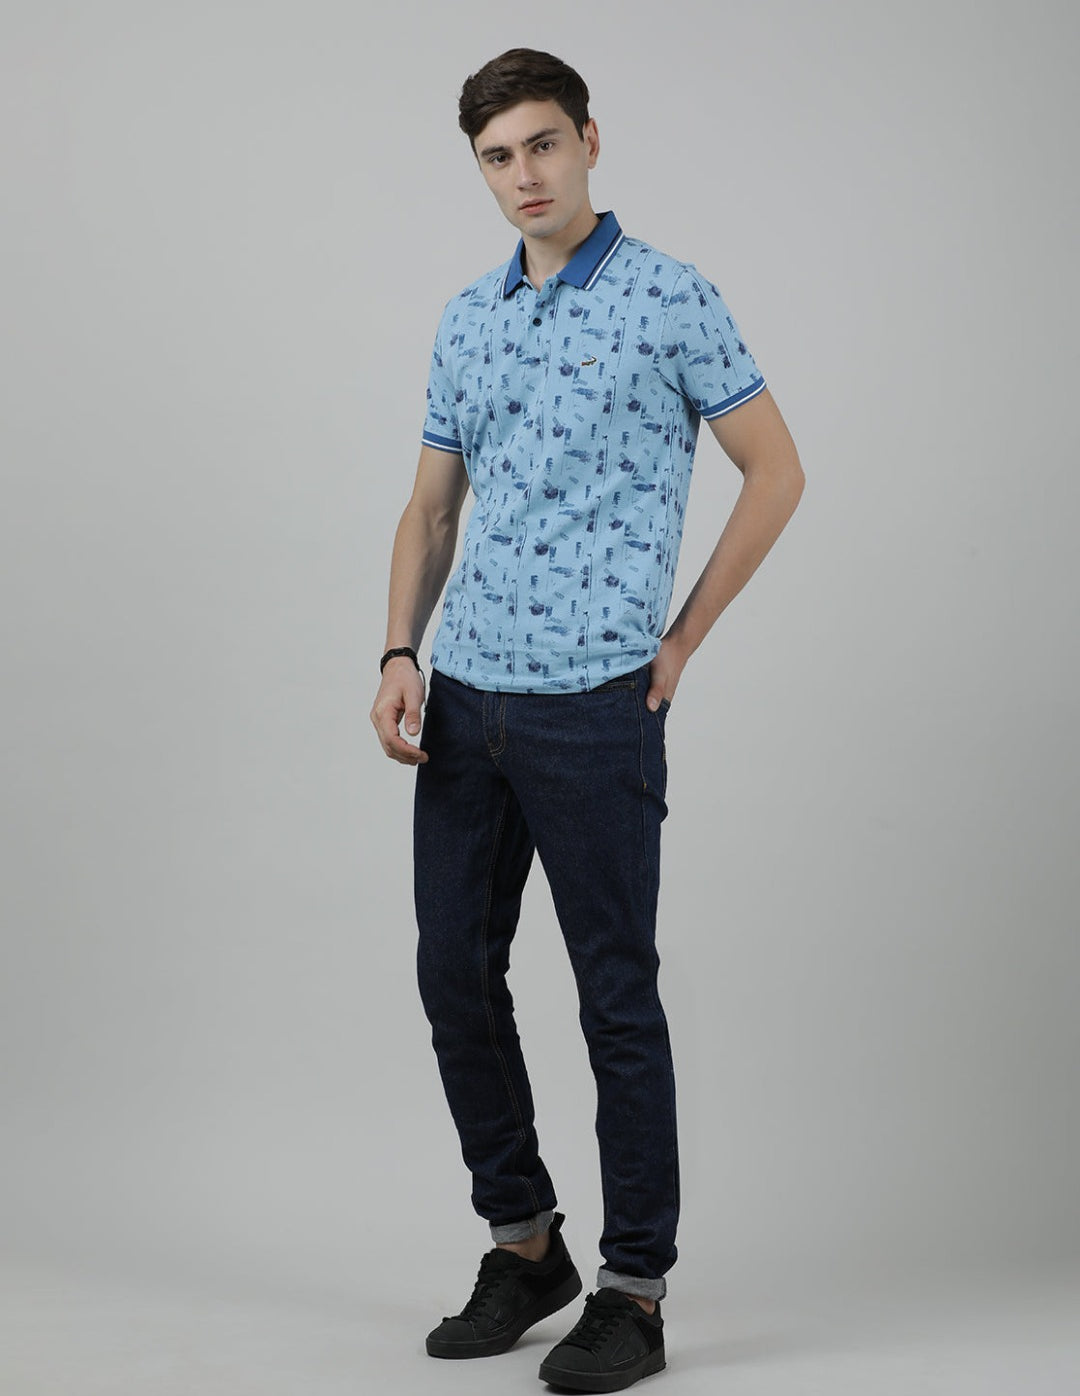 Crocodile Casual Light Blue T-Shirt Polo Printed Half Sleeve Slim Fit with Collar for Men